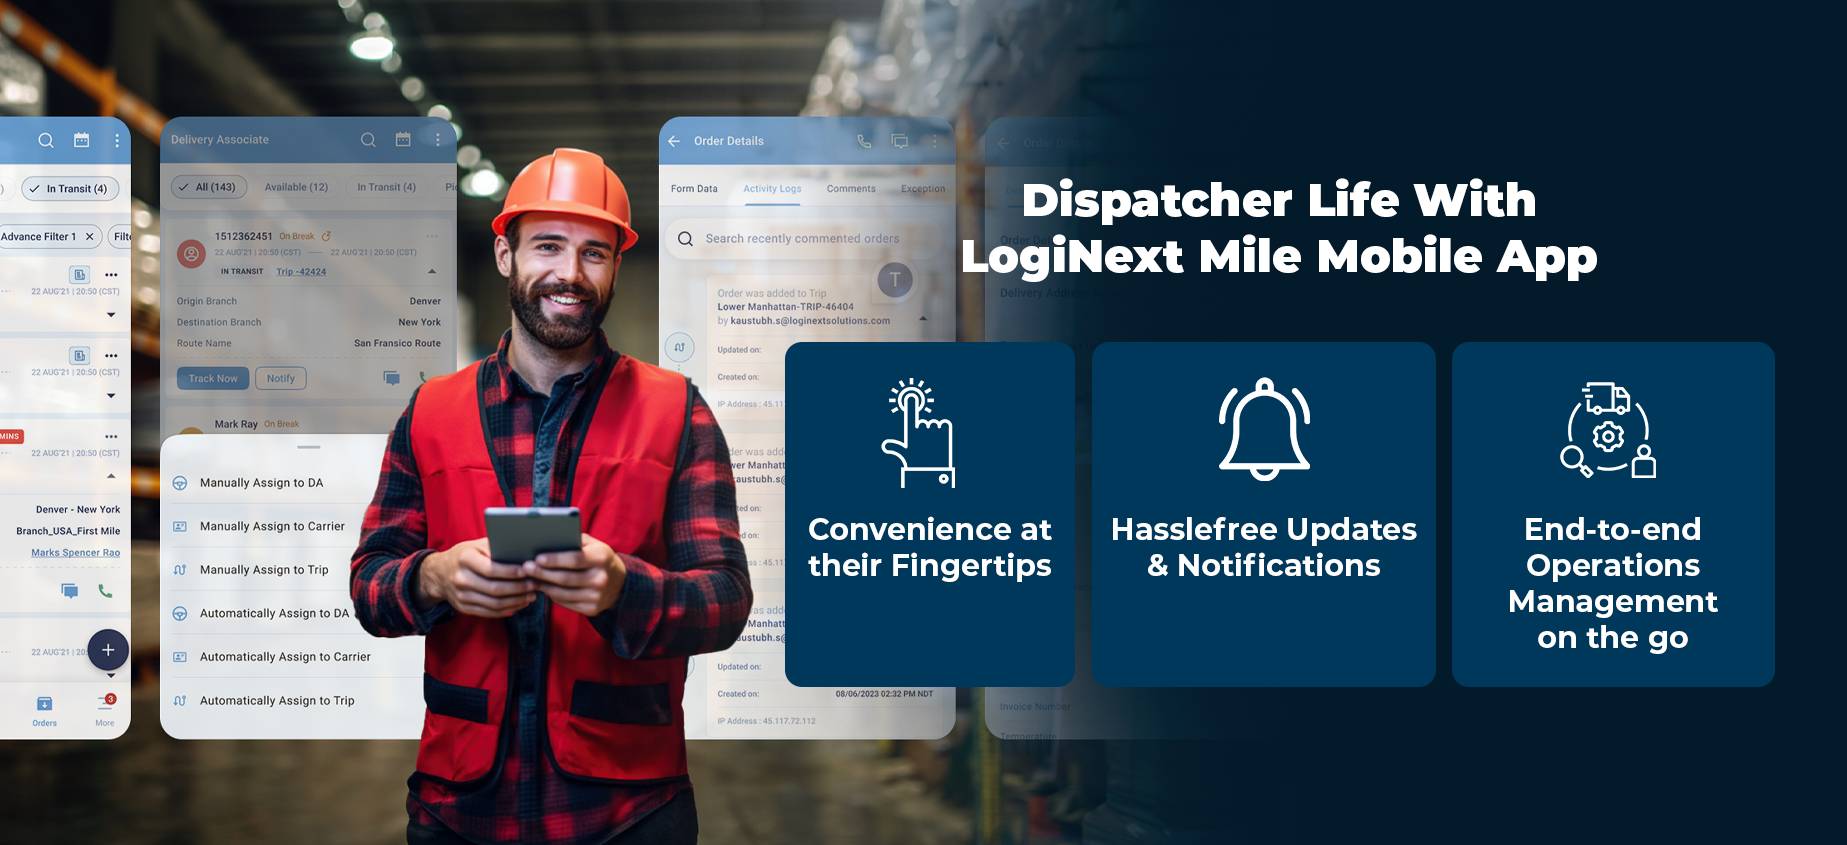 Dispatcher Life With Mile Mobile App from LogiNext